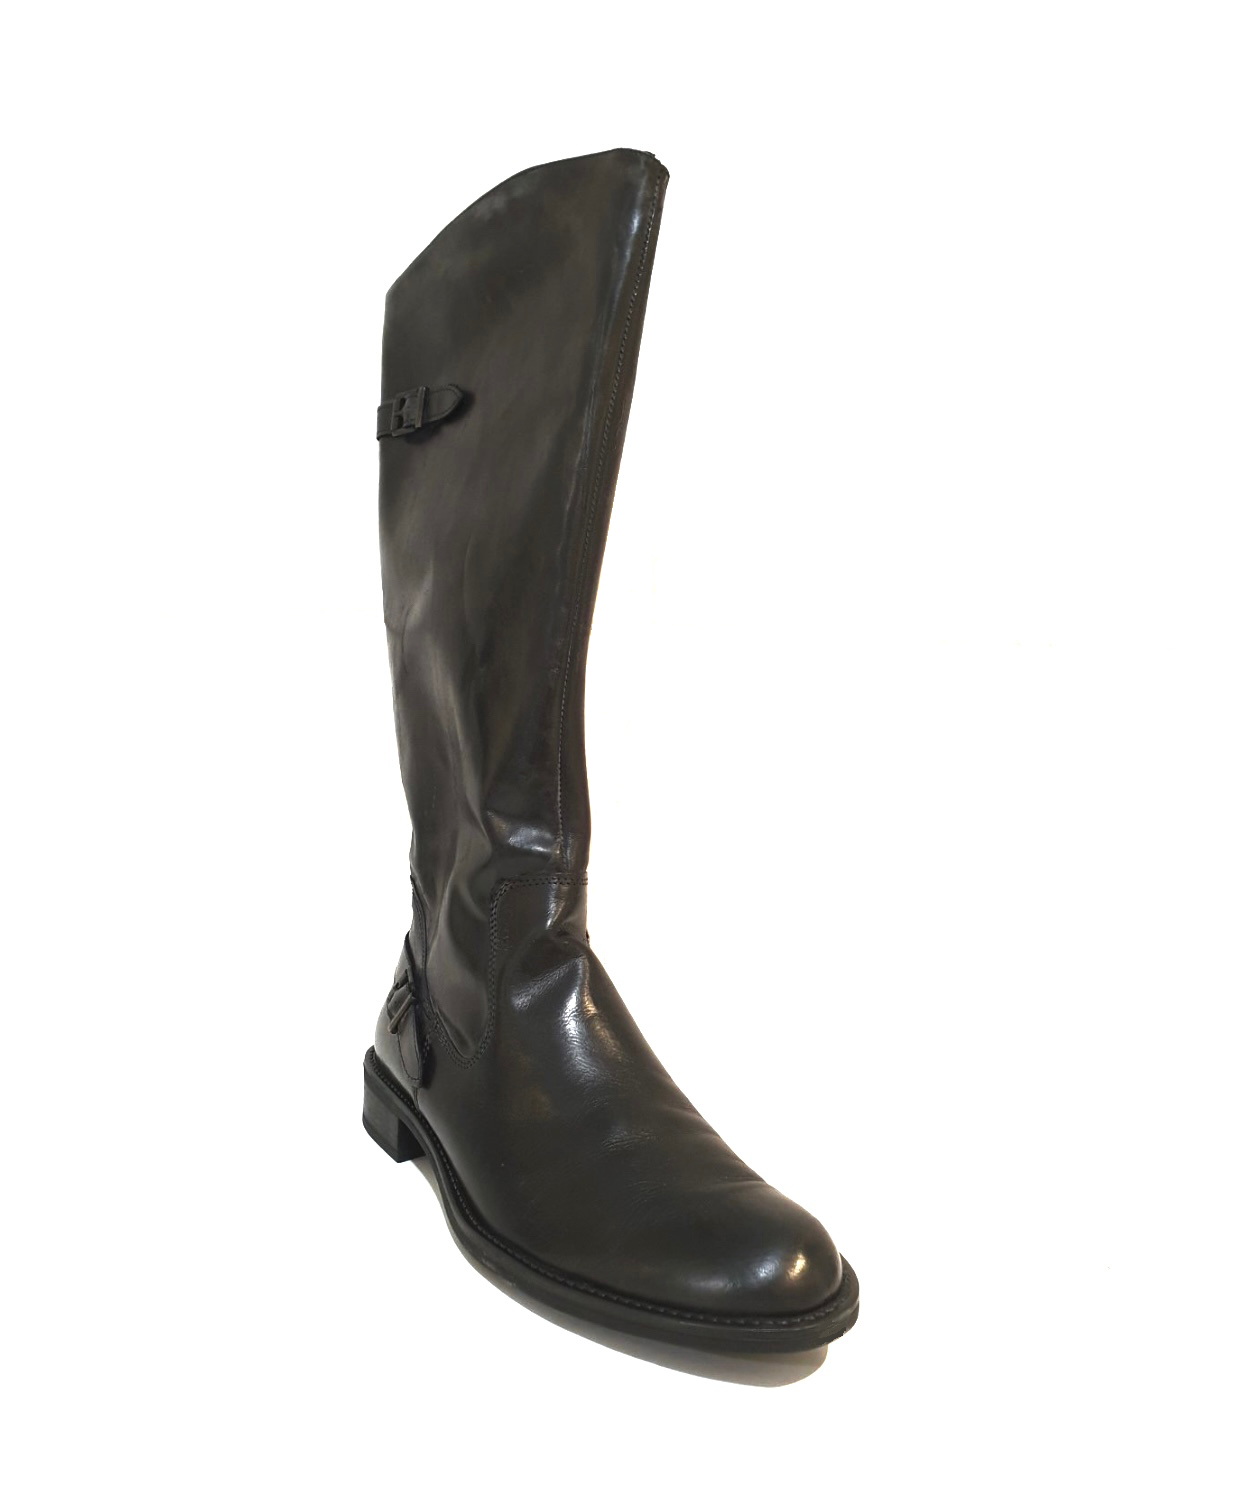 Old Florence 76236 Tamponato Nero Black Double Buckle Zip Knee High Boot Made In Italy